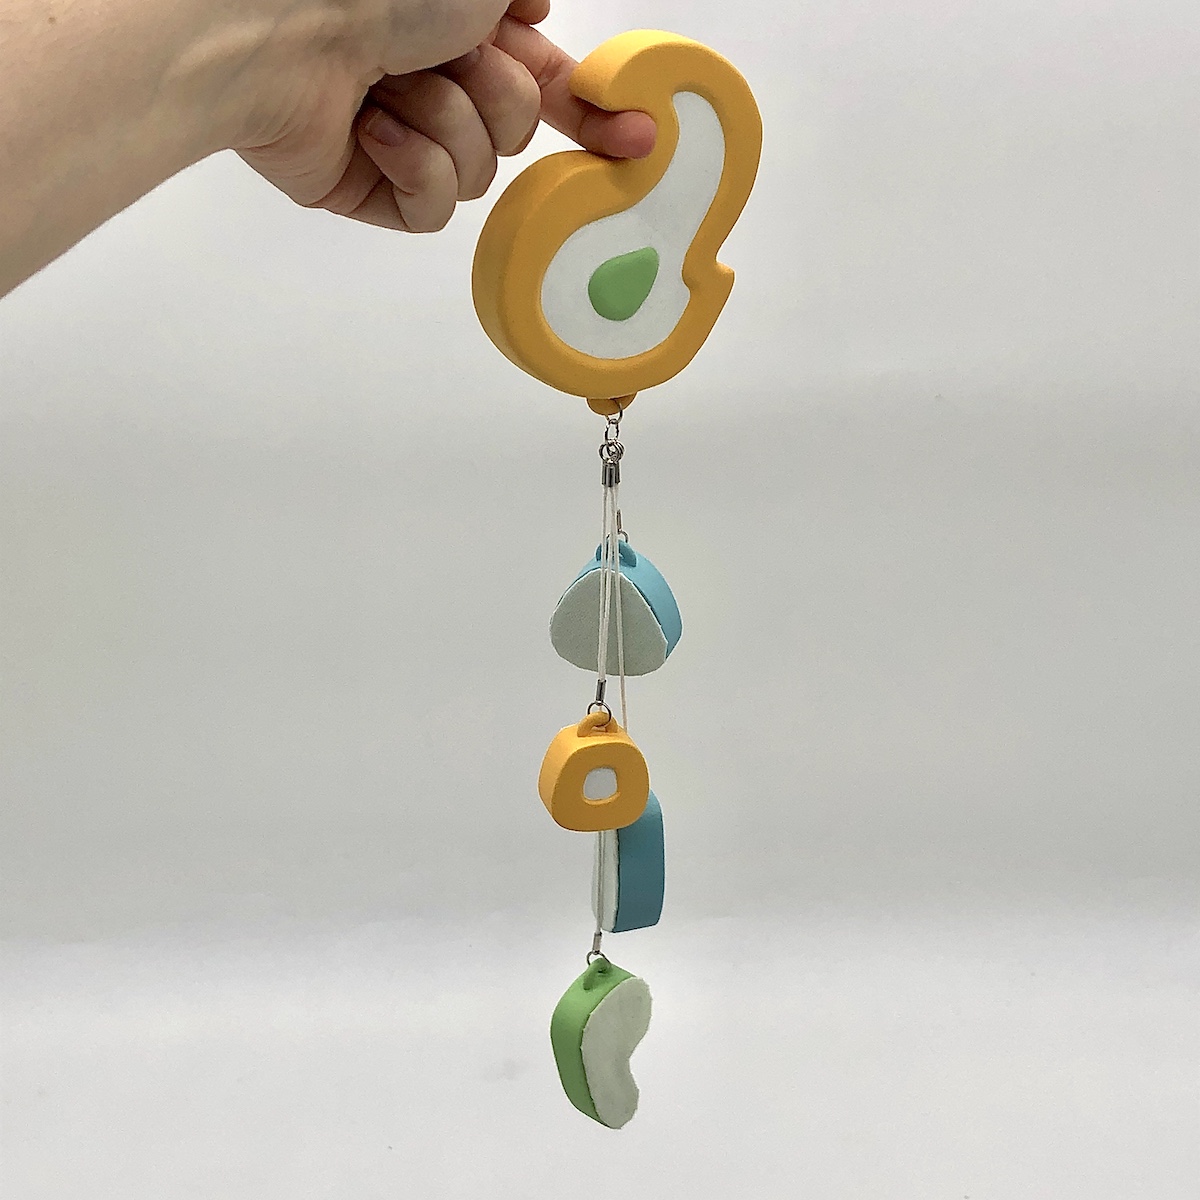 An acrylic sculpture with four smaller shapes hanging from a central point on a larger one. The colors are yellow, green, blue, and white. 